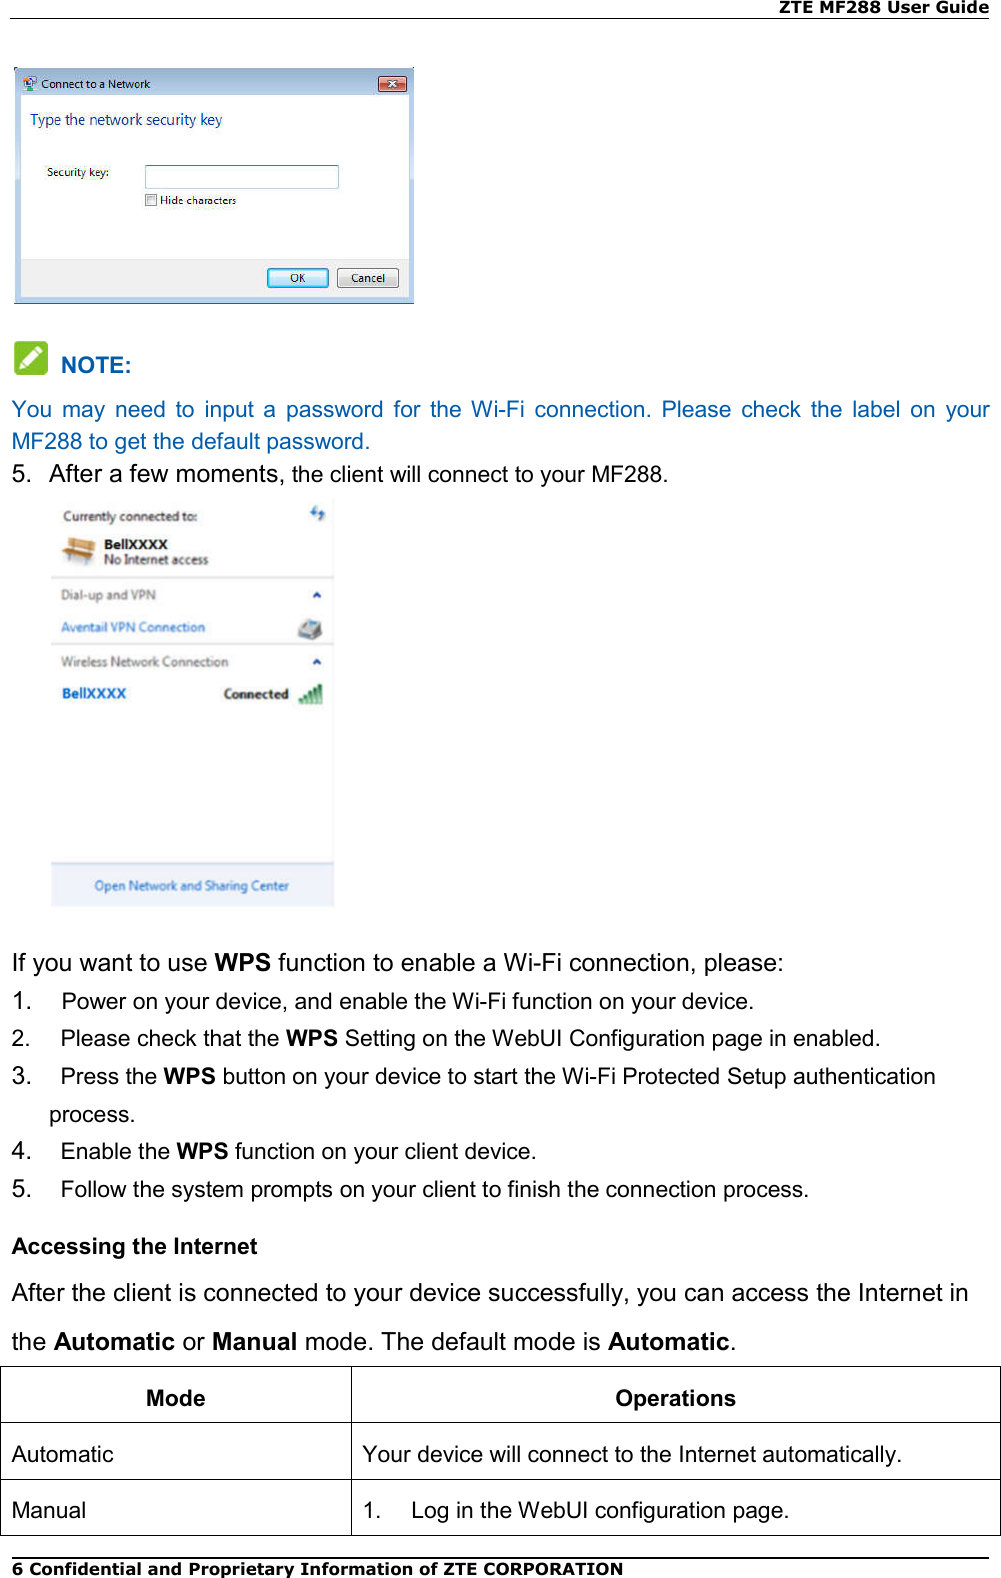    ZTE MF288 User Guide 6 Confidential and Proprietary Information of ZTE CORPORATION    NOTE: You  may  need  to  input  a  password  for  the  Wi-Fi  connection.  Please  check  the  label  on  your MF288 to get the default password. 5.  After a few moments, the client will connect to your MF288.  If you want to use WPS function to enable a Wi-Fi connection, please: 1.    Power on your device, and enable the Wi-Fi function on your device. 2.    Please check that the WPS Setting on the WebUI Configuration page in enabled. 3.    Press the WPS button on your device to start the Wi-Fi Protected Setup authentication process. 4.    Enable the WPS function on your client device. 5.    Follow the system prompts on your client to finish the connection process. Accessing the Internet After the client is connected to your device successfully, you can access the Internet in the Automatic or Manual mode. The default mode is Automatic. Mode  Operations Automatic  Your device will connect to the Internet automatically. Manual  1.    Log in the WebUI configuration page.   